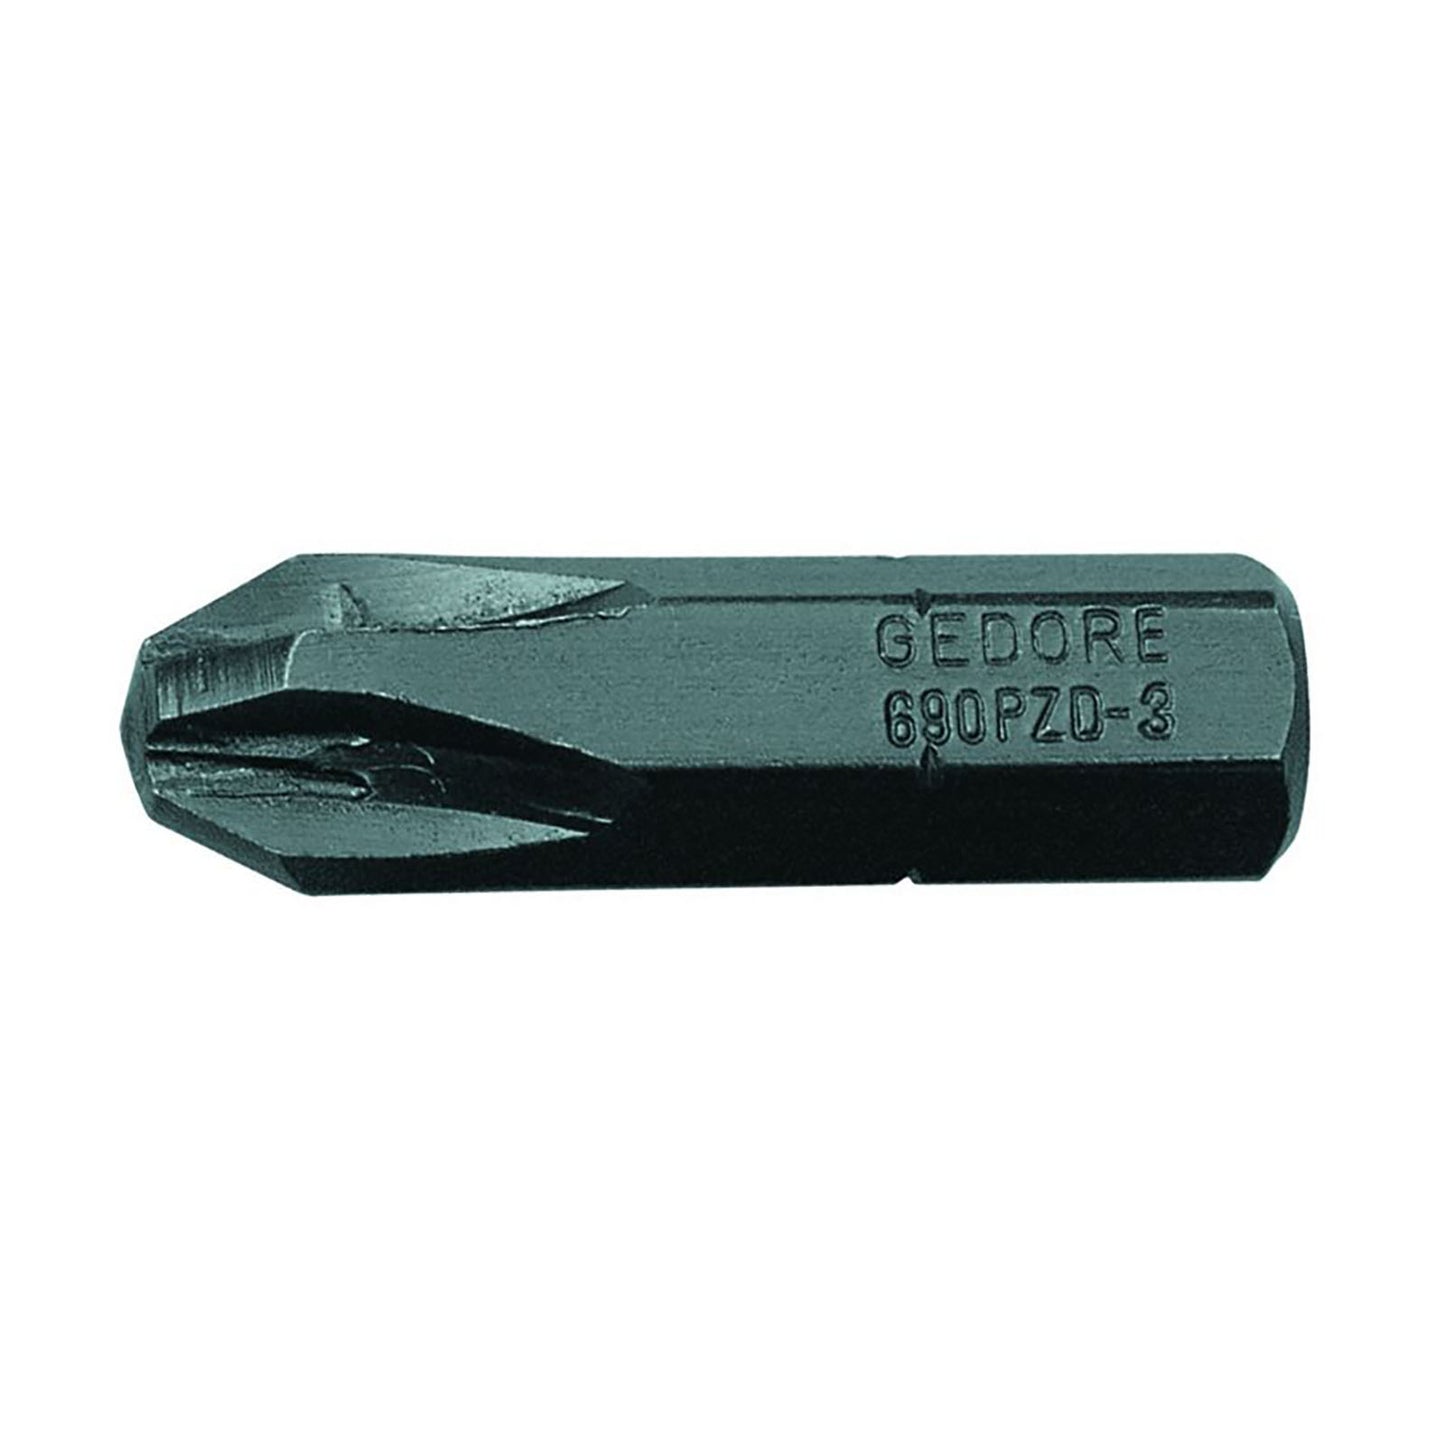 GEDORE 690 PZD 2 S-010 - Embout 1/4", PZ 2 (6552870)